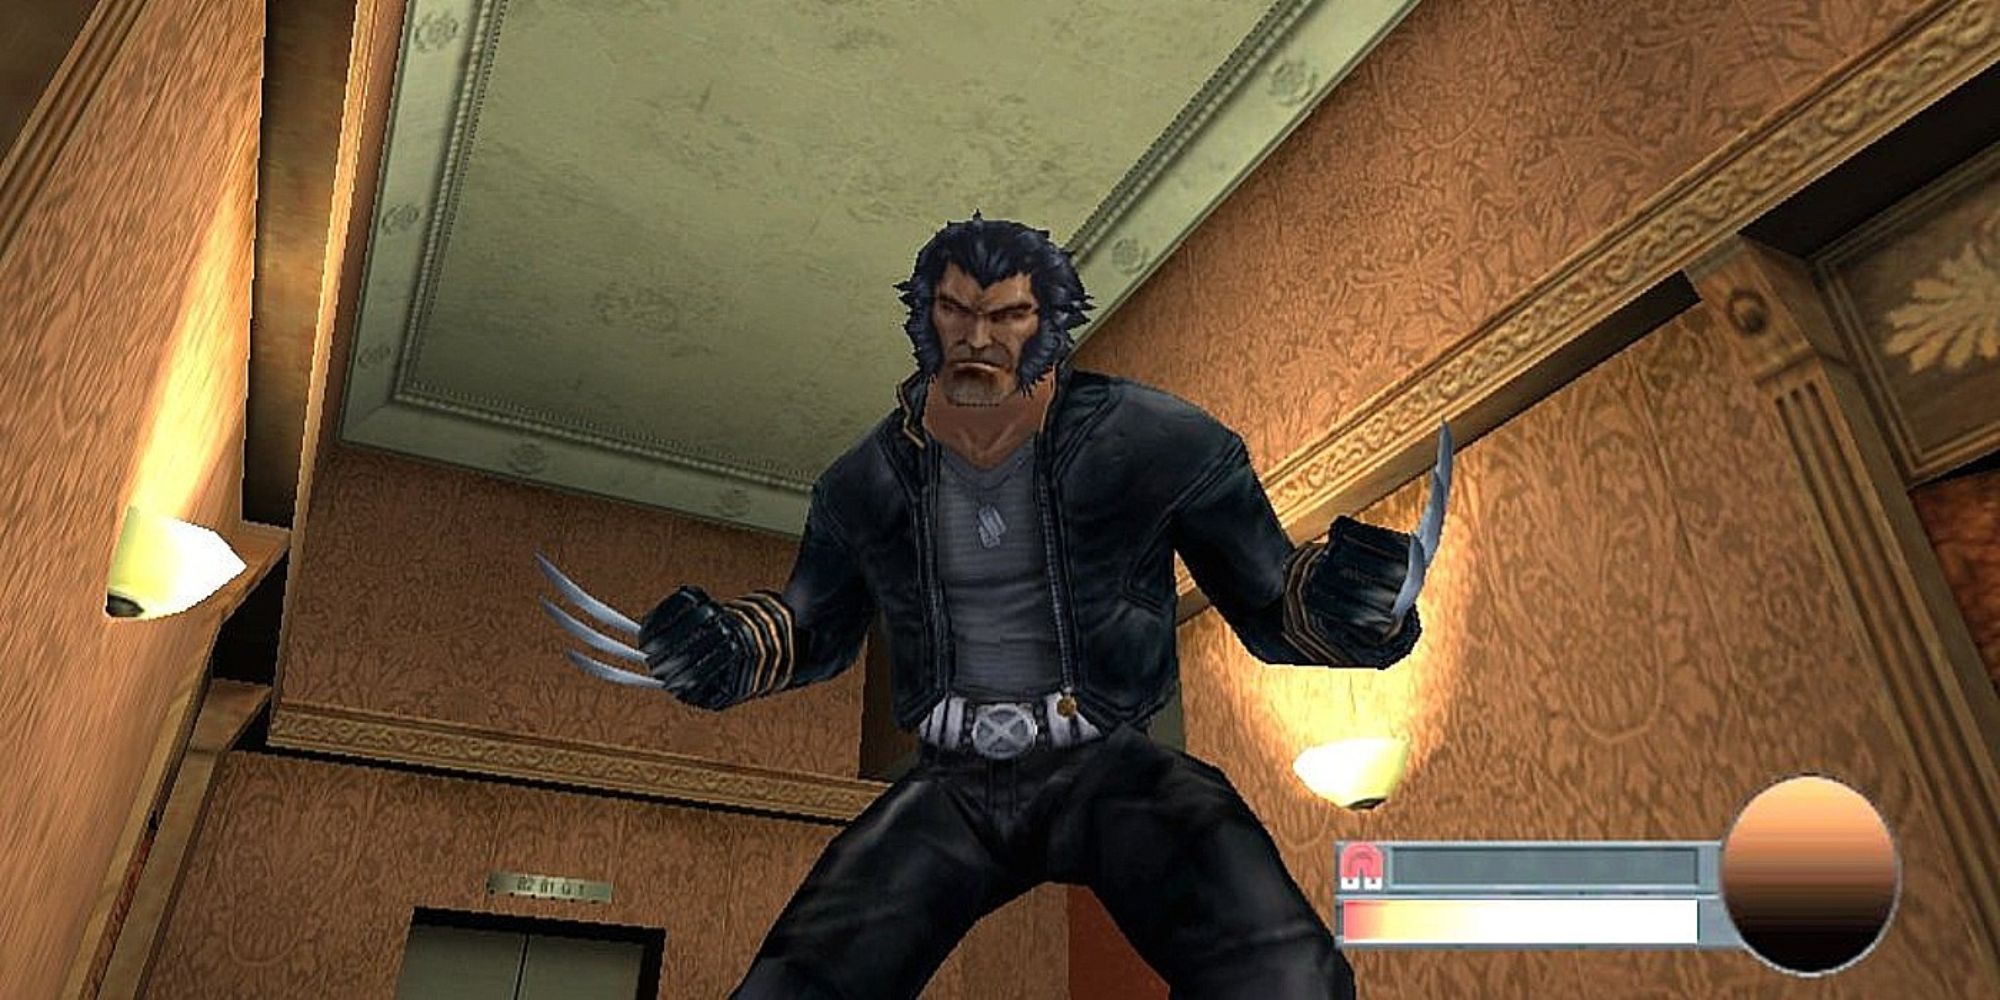 Wolverine stands in a hallway with his claws out